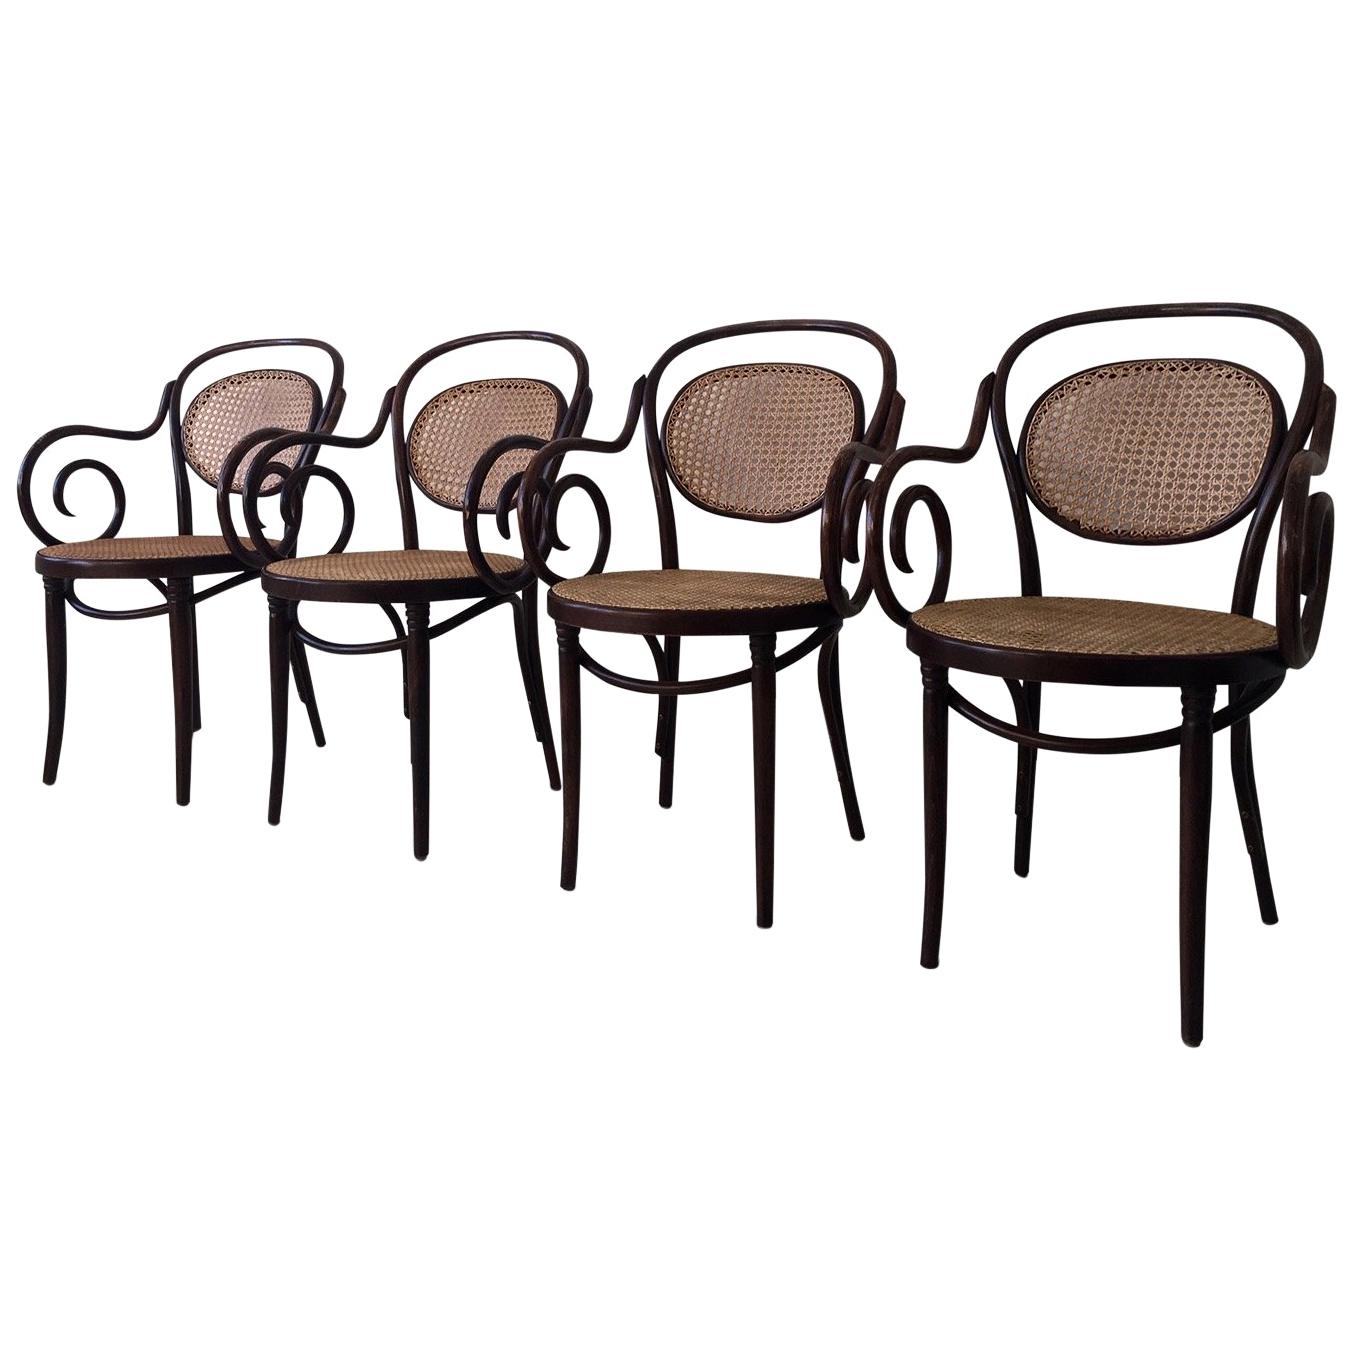 ZPM Radomsko, Former Thonet, No. 11 Bentwood and Rattan Dining Room Chairs